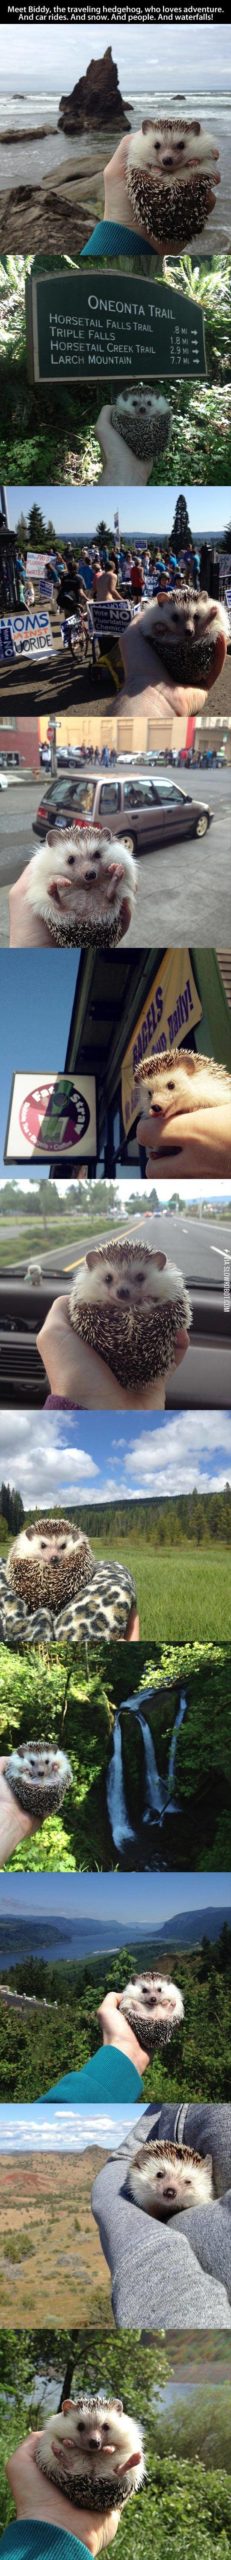 This+Guy+Is+Known+As+The+Traveling+Hedgehog